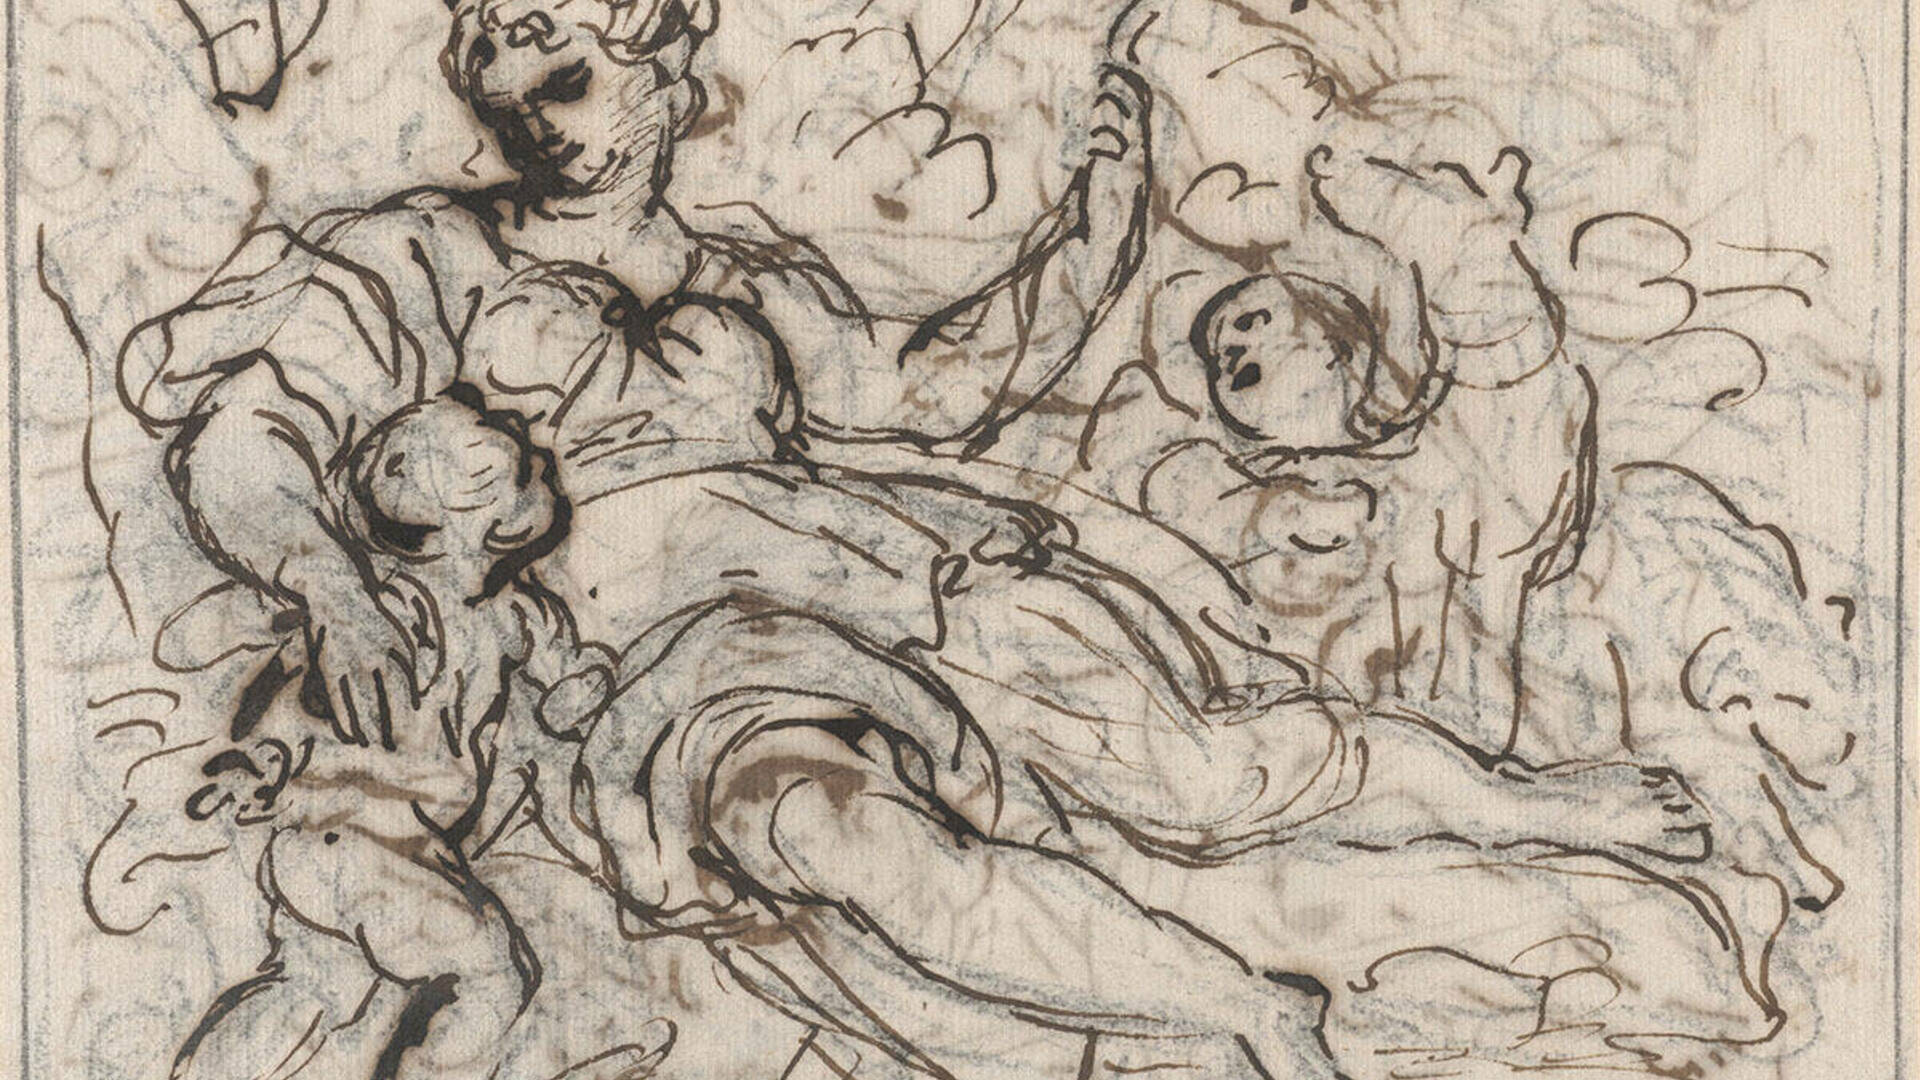 Giacinto Calandrucci (Italian, 1646–1707), Diana with Two Putti, ca. 1680–85, pen and brown ink over black chalk on laid paper. On extended loan as a promised gift from Mr. John D. Reilly ’63, L1991.031.004